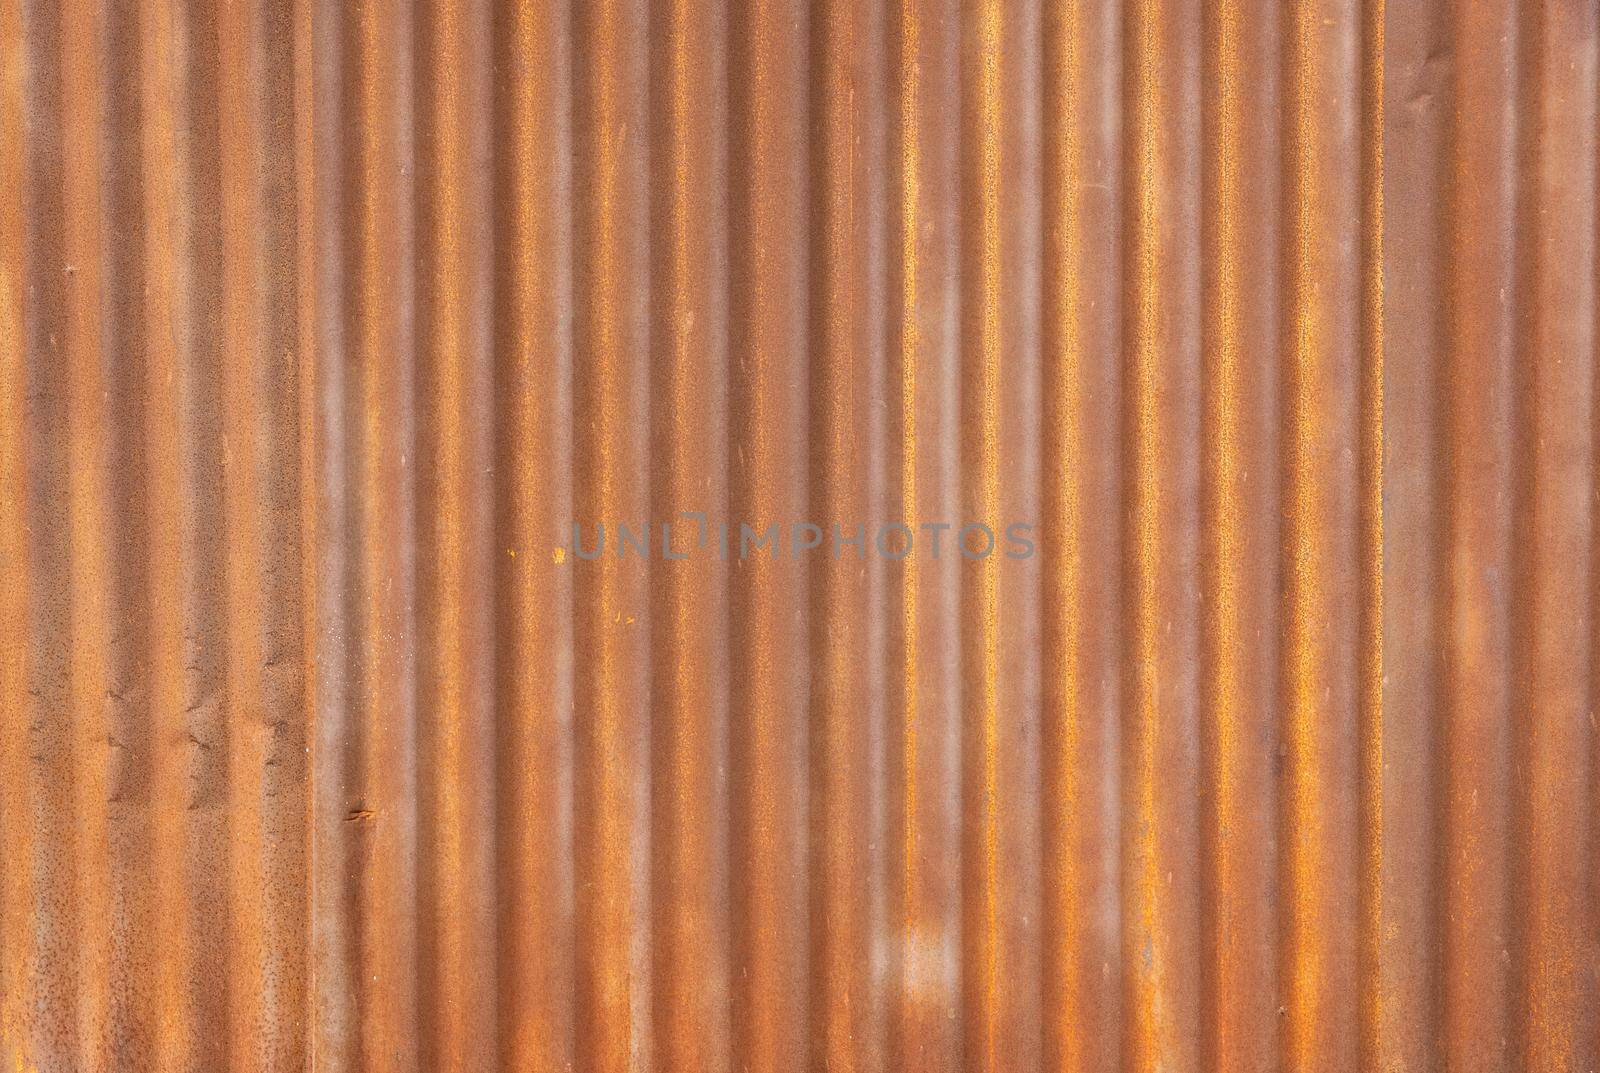 Rusted zinc roof wall for background. by toa55